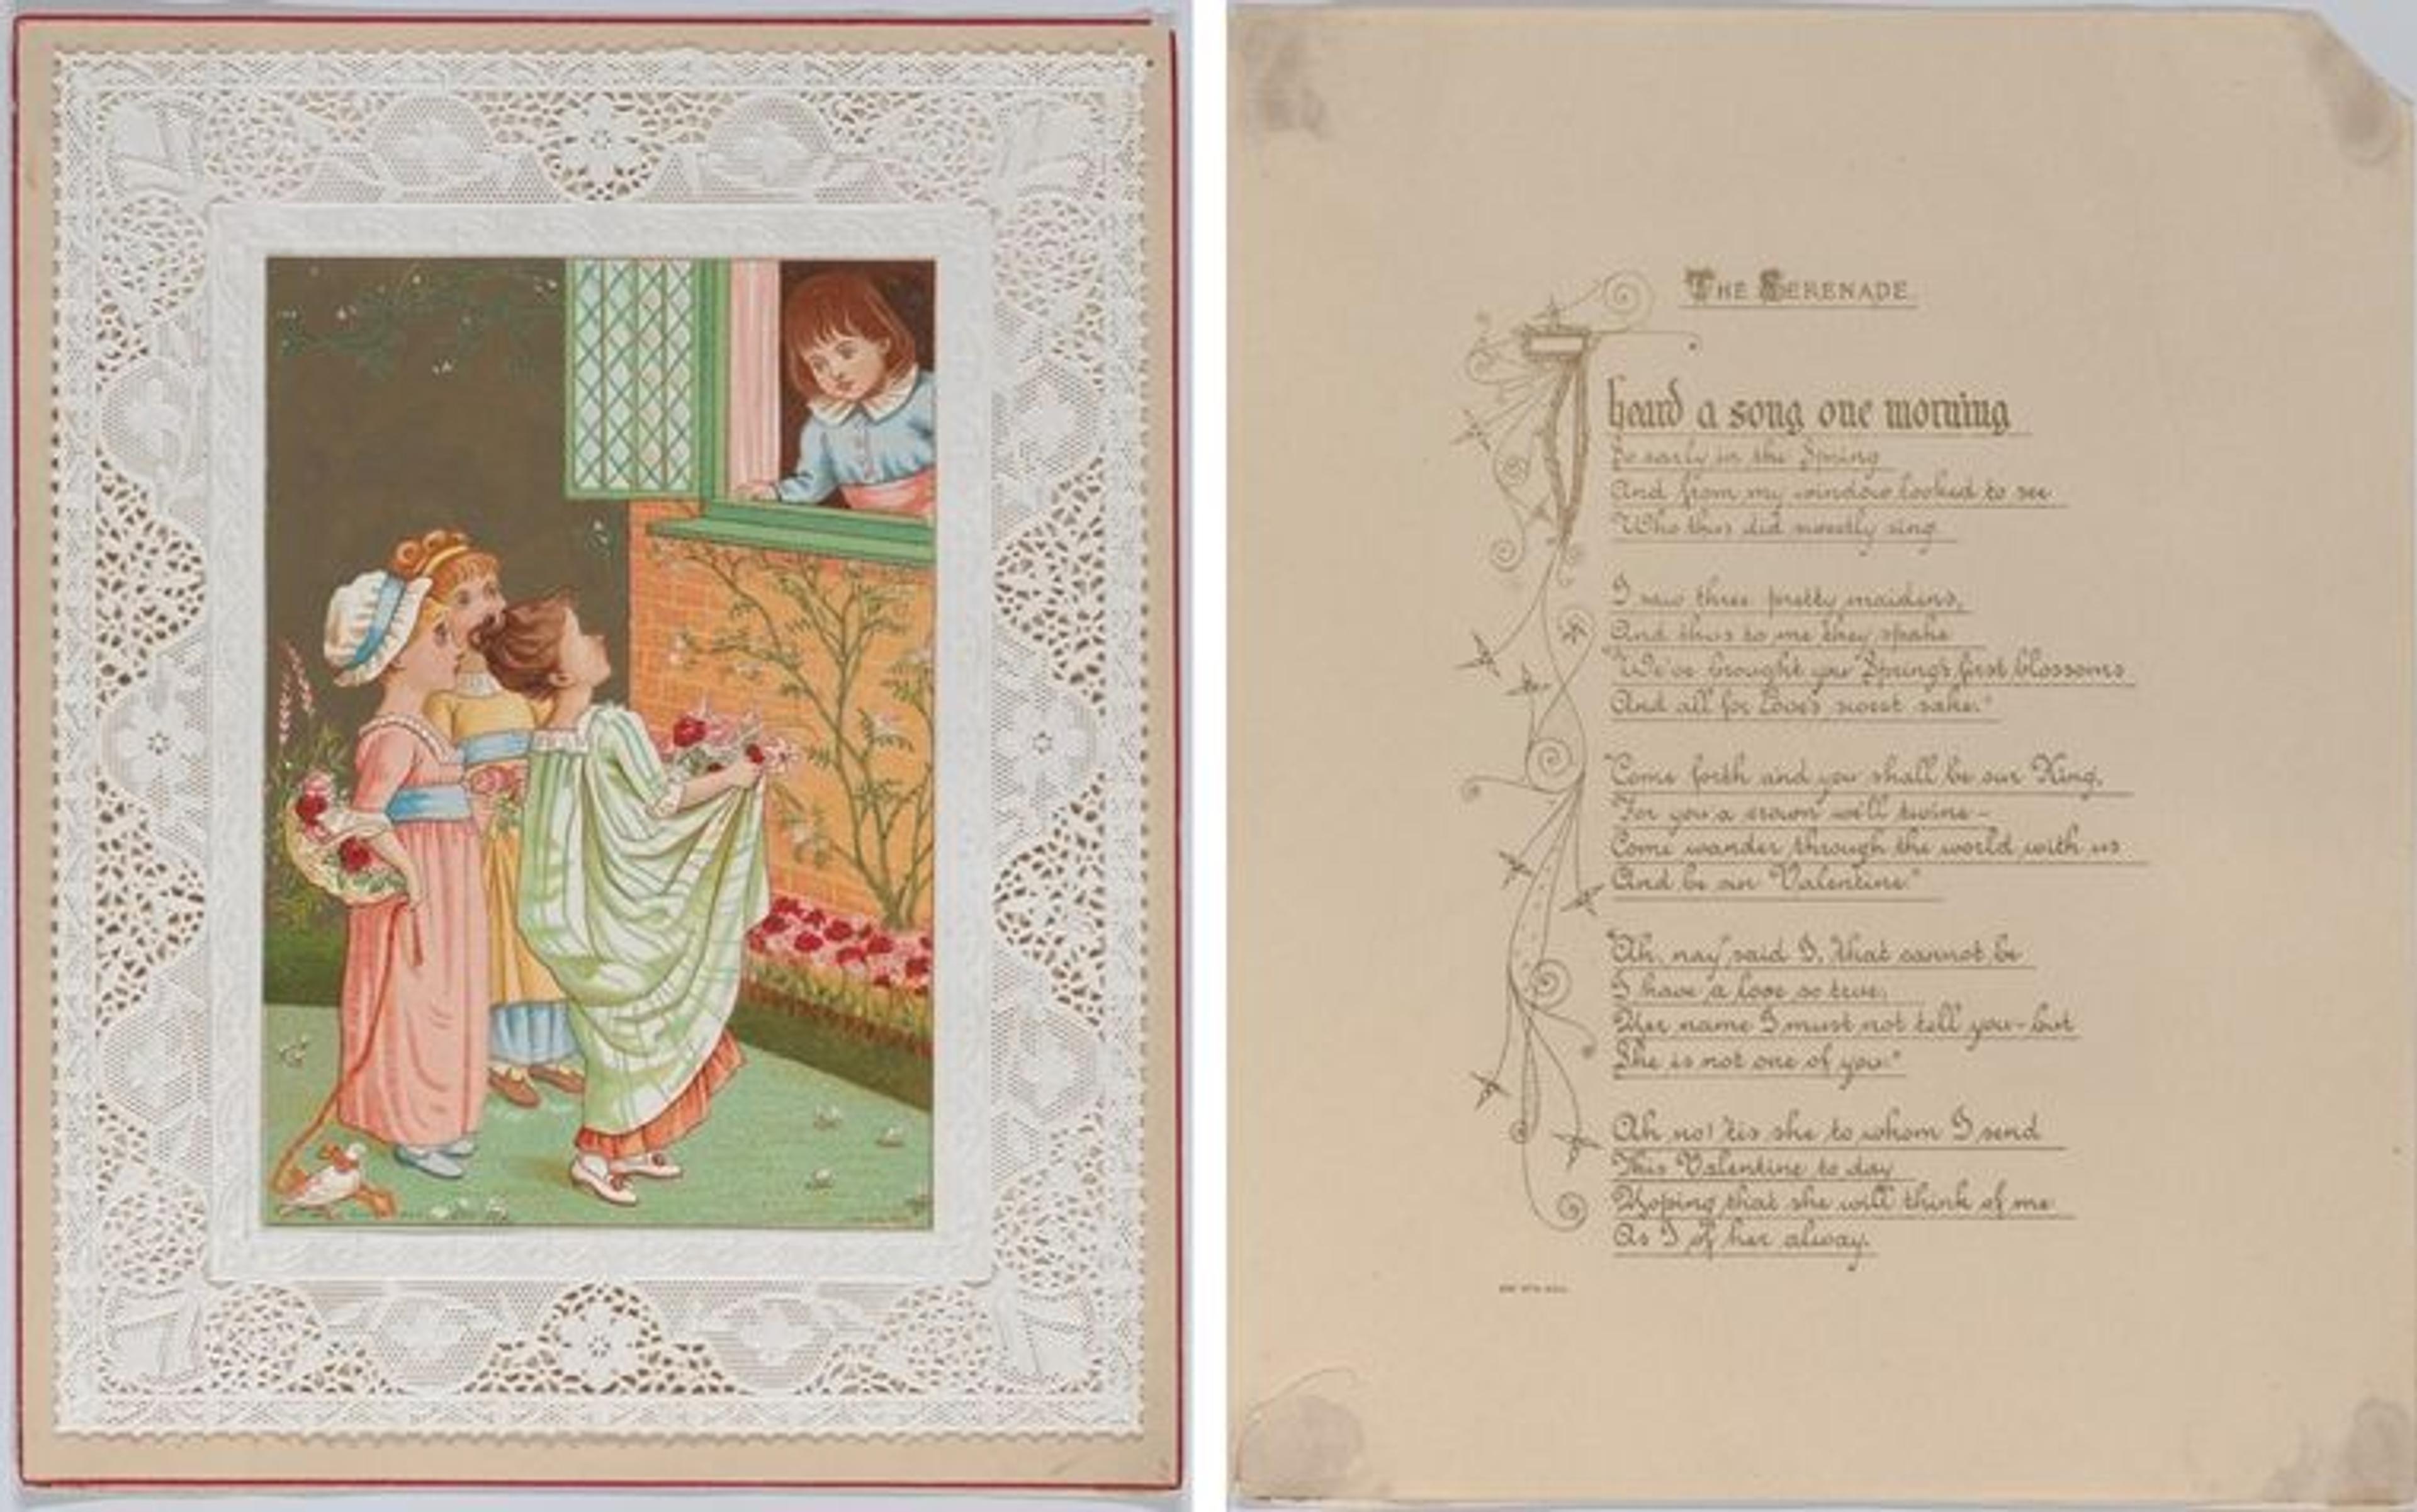 Front and back of a Kate Greenaway valentine. On the front, a group of three young girls serenade a young boy watching them from a window; on the back, a poem entitled "The Serenade"